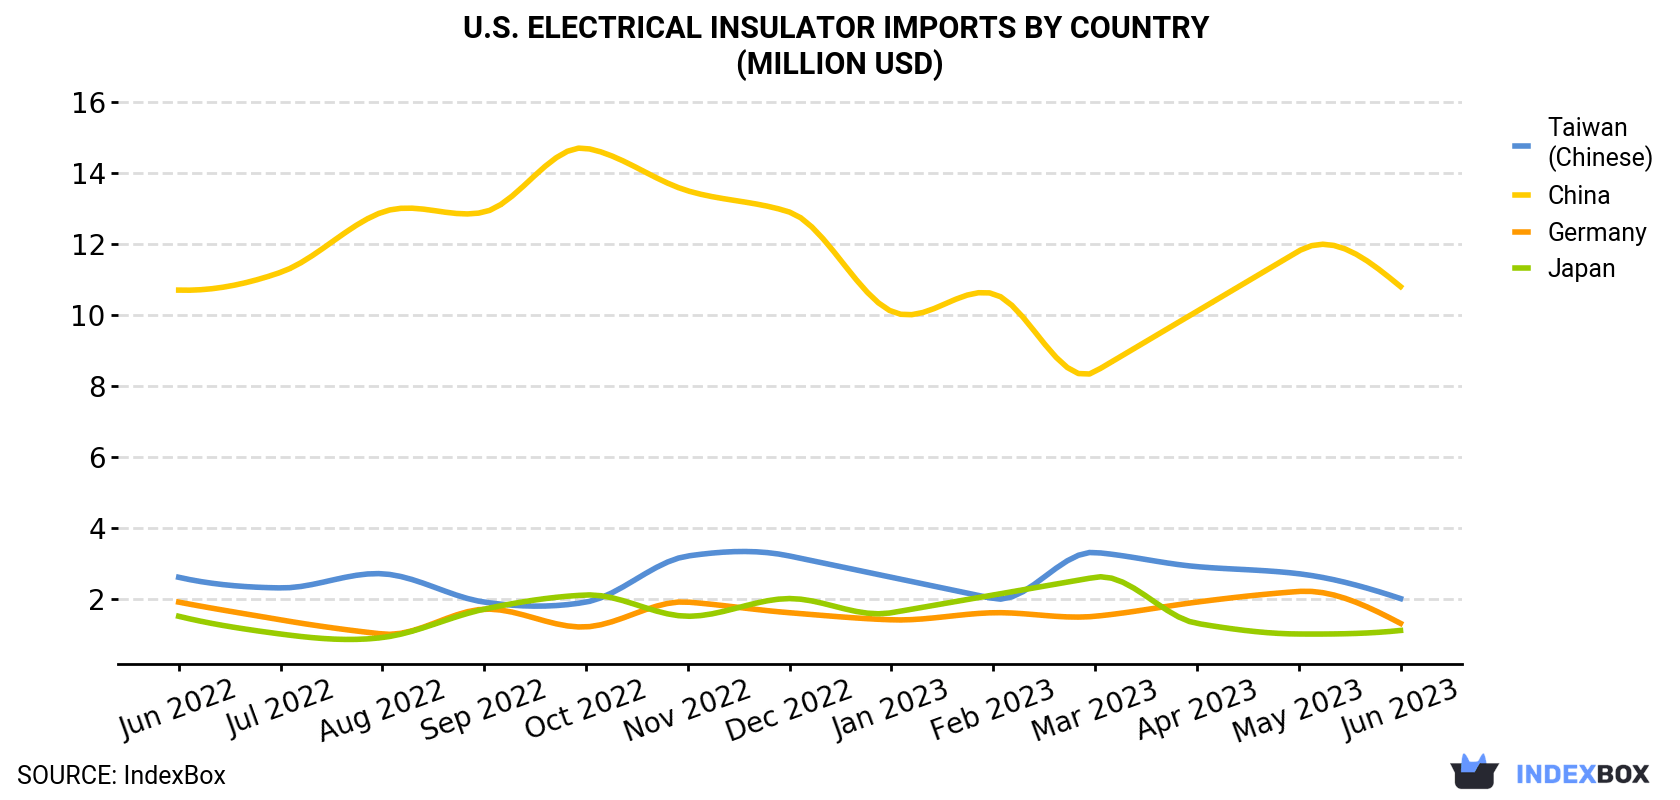 U.S. Electrical Insulator Imports By Country (Million USD)